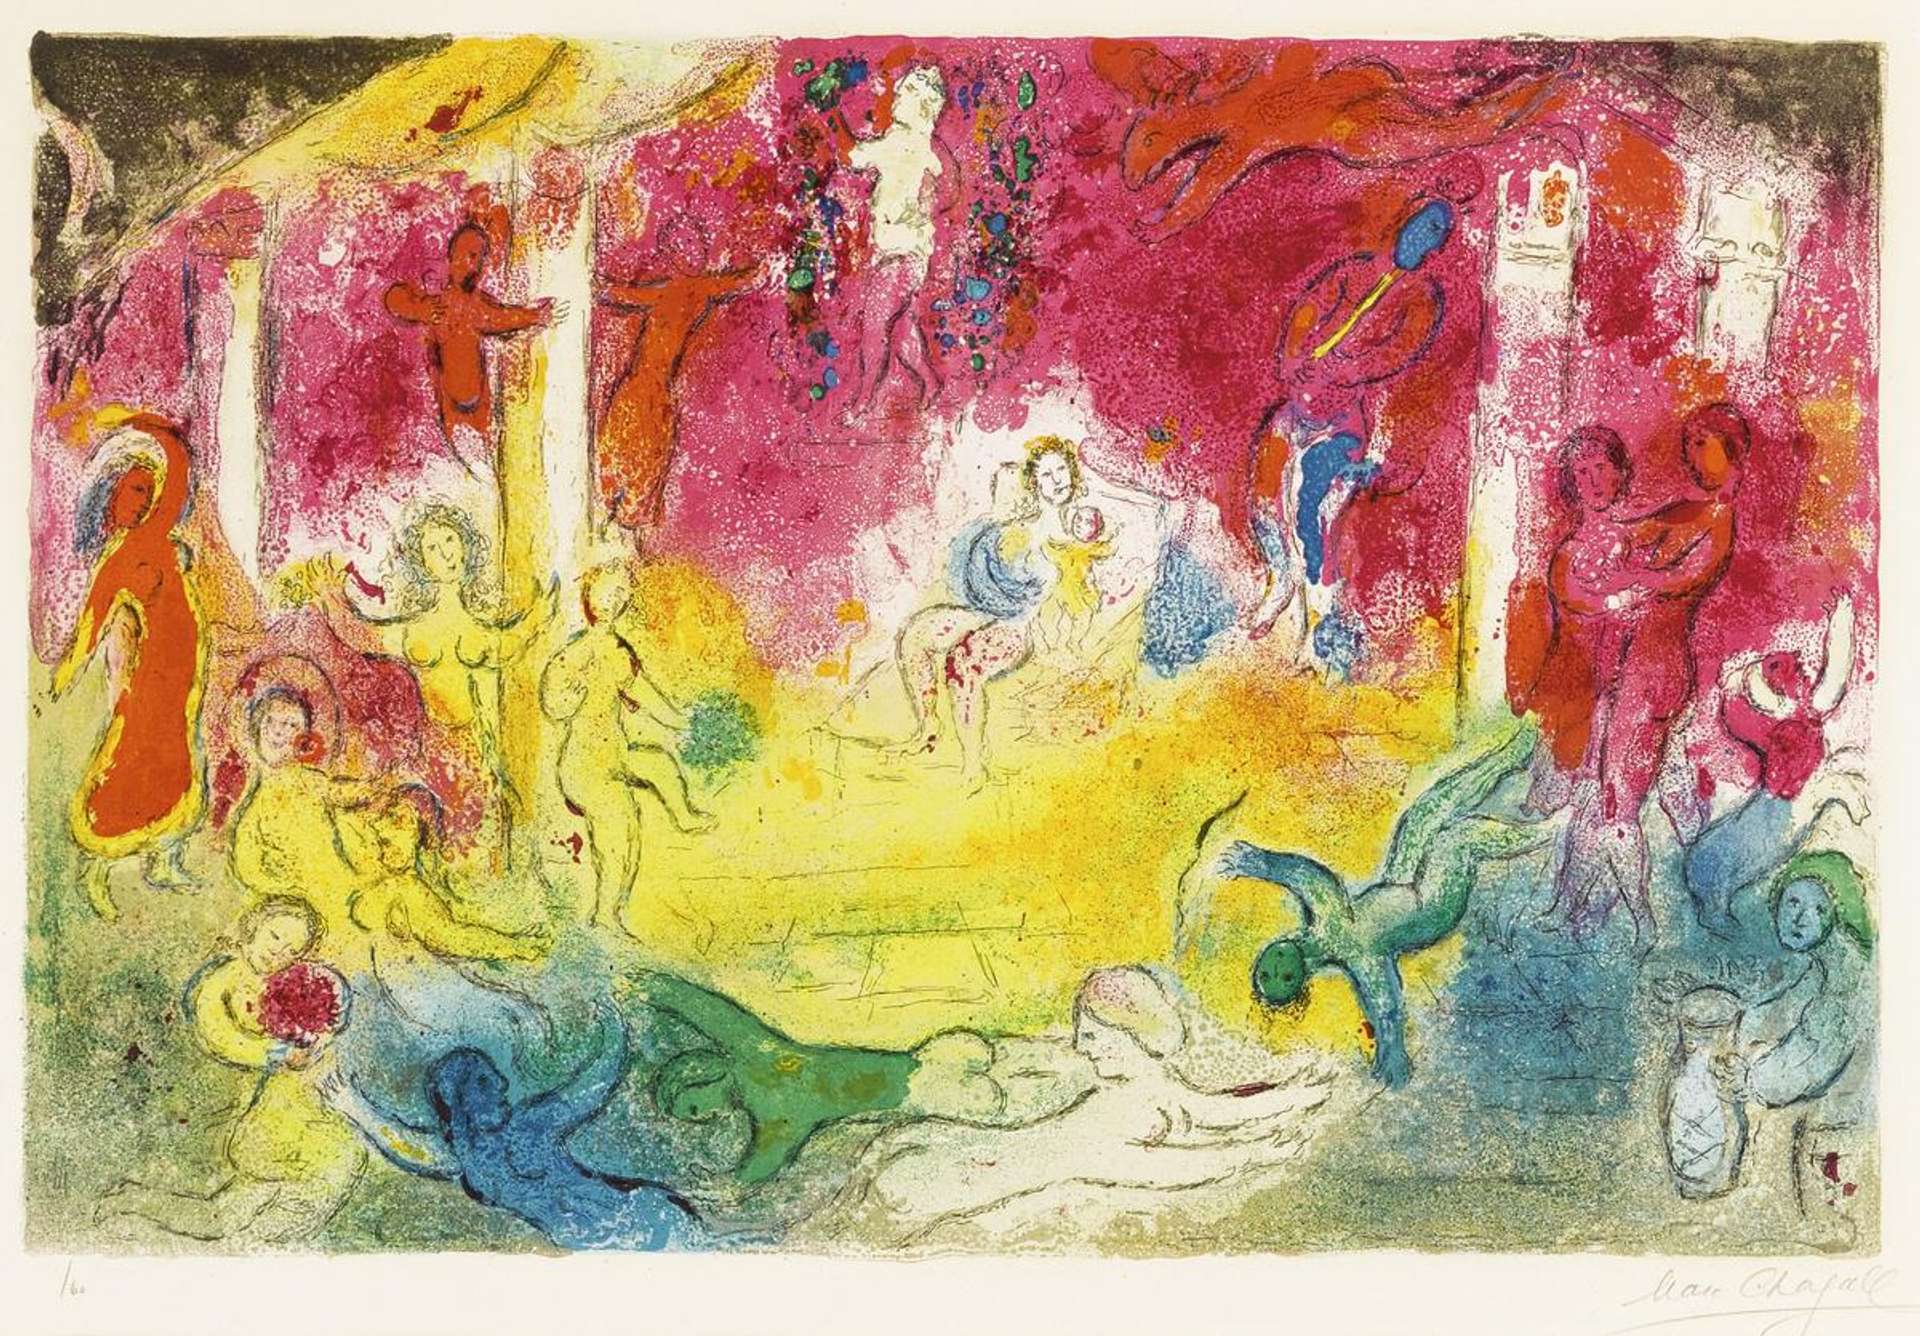 Marc Chagall: Temple And The History Of Bacchus - Signed Print